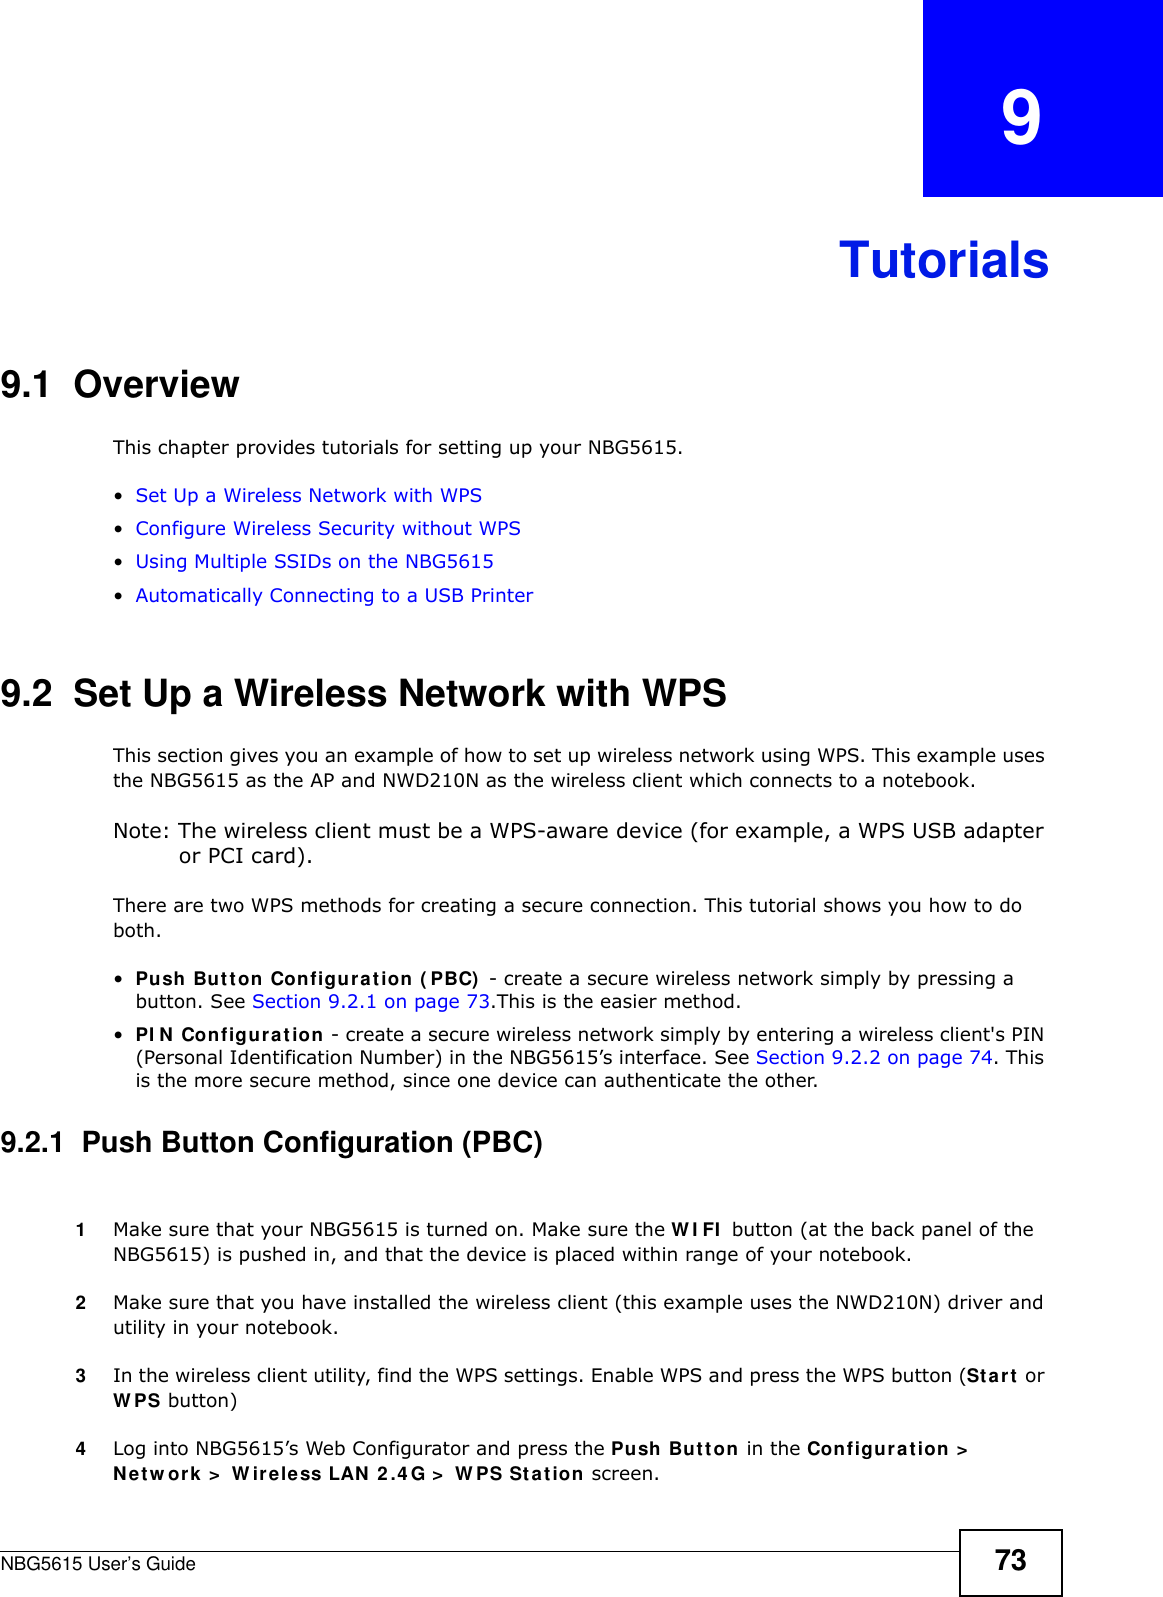 NBG5615 User’s Guide 73CHAPTER   9Tutorials9.1  OverviewThis chapter provides tutorials for setting up your NBG5615.•Set Up a Wireless Network with WPS•Configure Wireless Security without WPS•Using Multiple SSIDs on the NBG5615•Automatically Connecting to a USB Printer9.2  Set Up a Wireless Network with WPSThis section gives you an example of how to set up wireless network using WPS. This example uses the NBG5615 as the AP and NWD210N as the wireless client which connects to a notebook. Note: The wireless client must be a WPS-aware device (for example, a WPS USB adapter or PCI card).There are two WPS methods for creating a secure connection. This tutorial shows you how to do both.•Push Button Configuration ( PBC)  - create a secure wireless network simply by pressing a button. See Section 9.2.1 on page 73.This is the easier method.•PI N Configuration - create a secure wireless network simply by entering a wireless client&apos;s PIN (Personal Identification Number) in the NBG5615’s interface. See Section 9.2.2 on page 74. This is the more secure method, since one device can authenticate the other.9.2.1  Push Button Configuration (PBC)1Make sure that your NBG5615 is turned on. Make sure the W I FI  button (at the back panel of the NBG5615) is pushed in, and that the device is placed within range of your notebook. 2Make sure that you have installed the wireless client (this example uses the NWD210N) driver and utility in your notebook.3In the wireless client utility, find the WPS settings. Enable WPS and press the WPS button (Start or W PS button)4Log into NBG5615’s Web Configurator and press the Push Button in the Configuration &gt;  Netw ork &gt;  W ireless LAN 2 .4 G &gt;  W PS Station screen. 